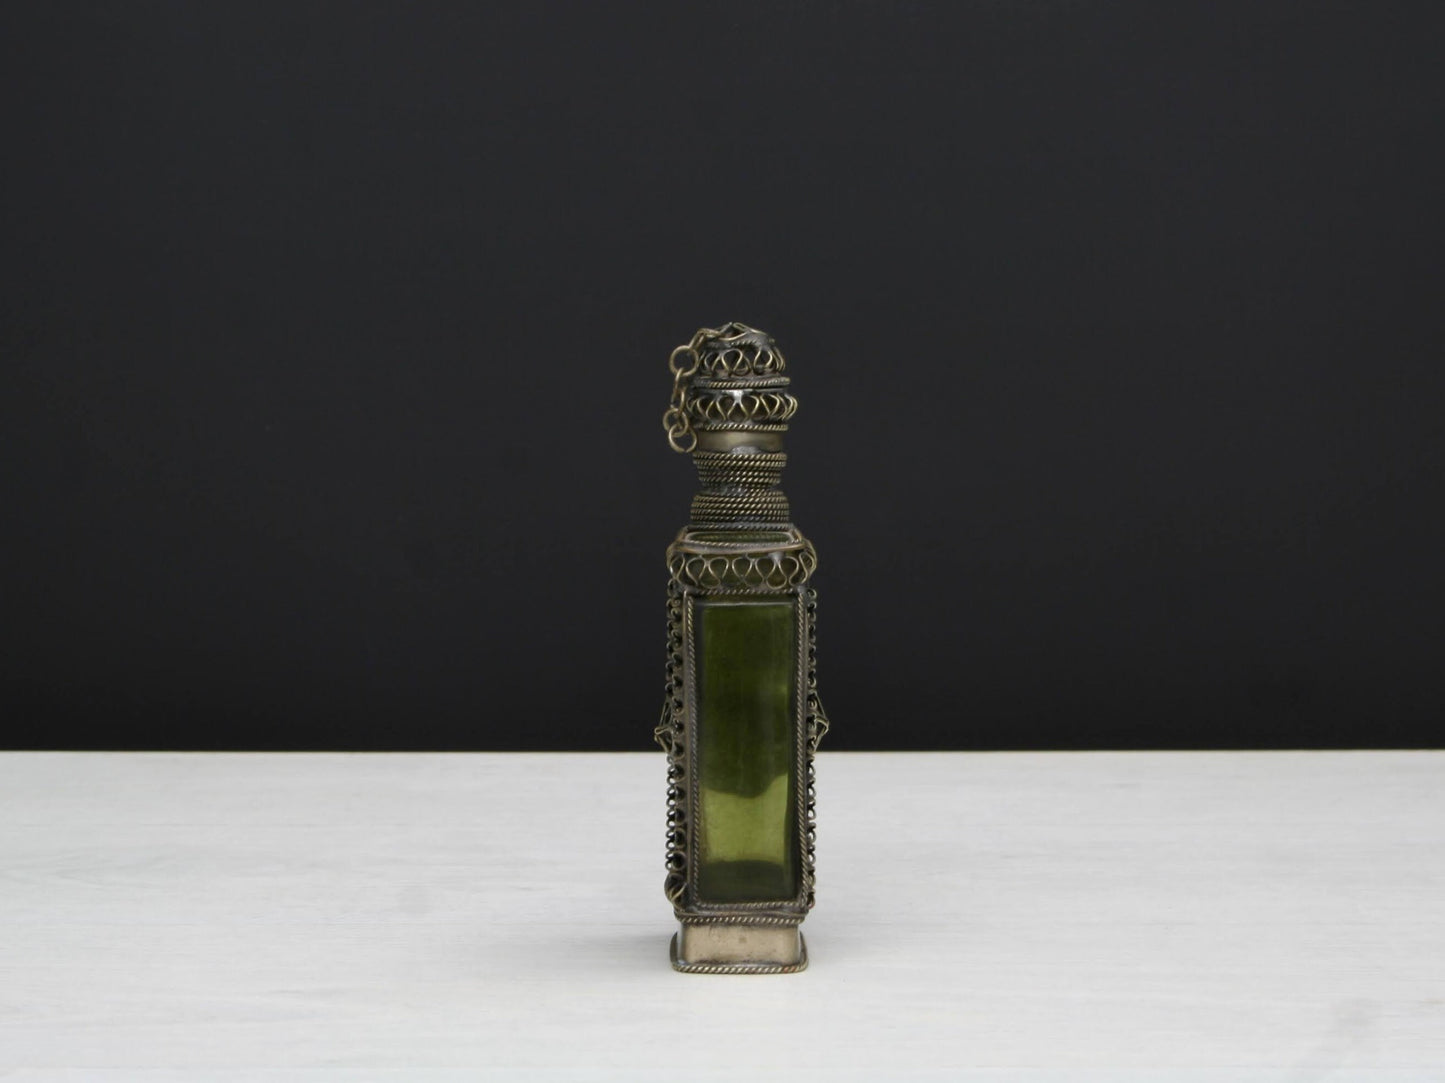 French Antique , Snuff Bottle | Shabby Chic Vanity-Antique Bottle | Bathroom Decor , Unique Finds and Great Deals